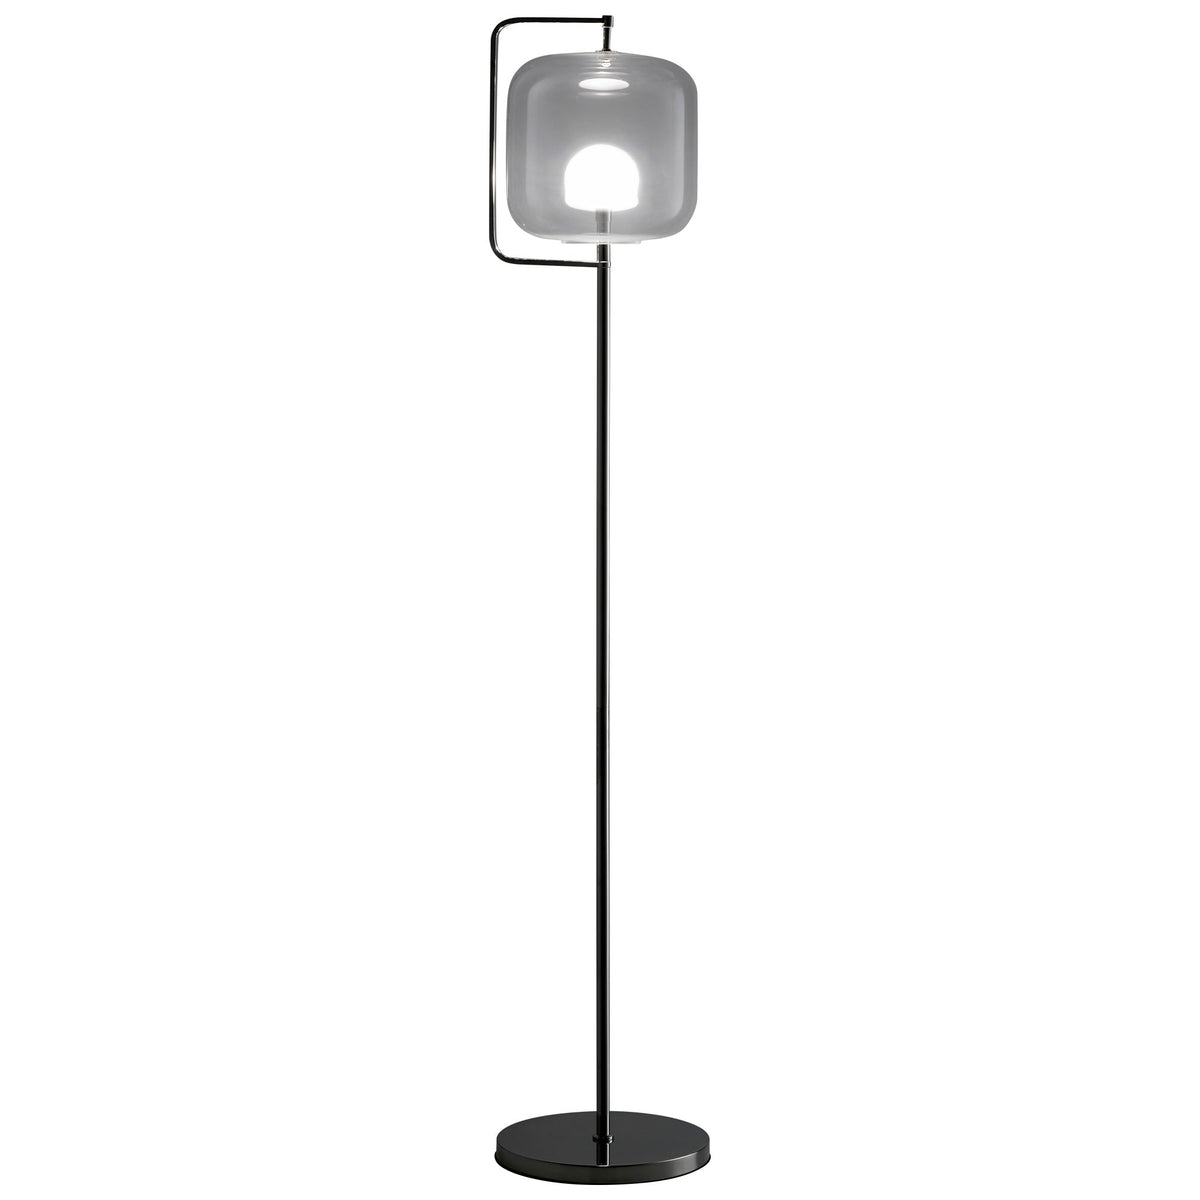 Isotope Floor Lamp by Cyan